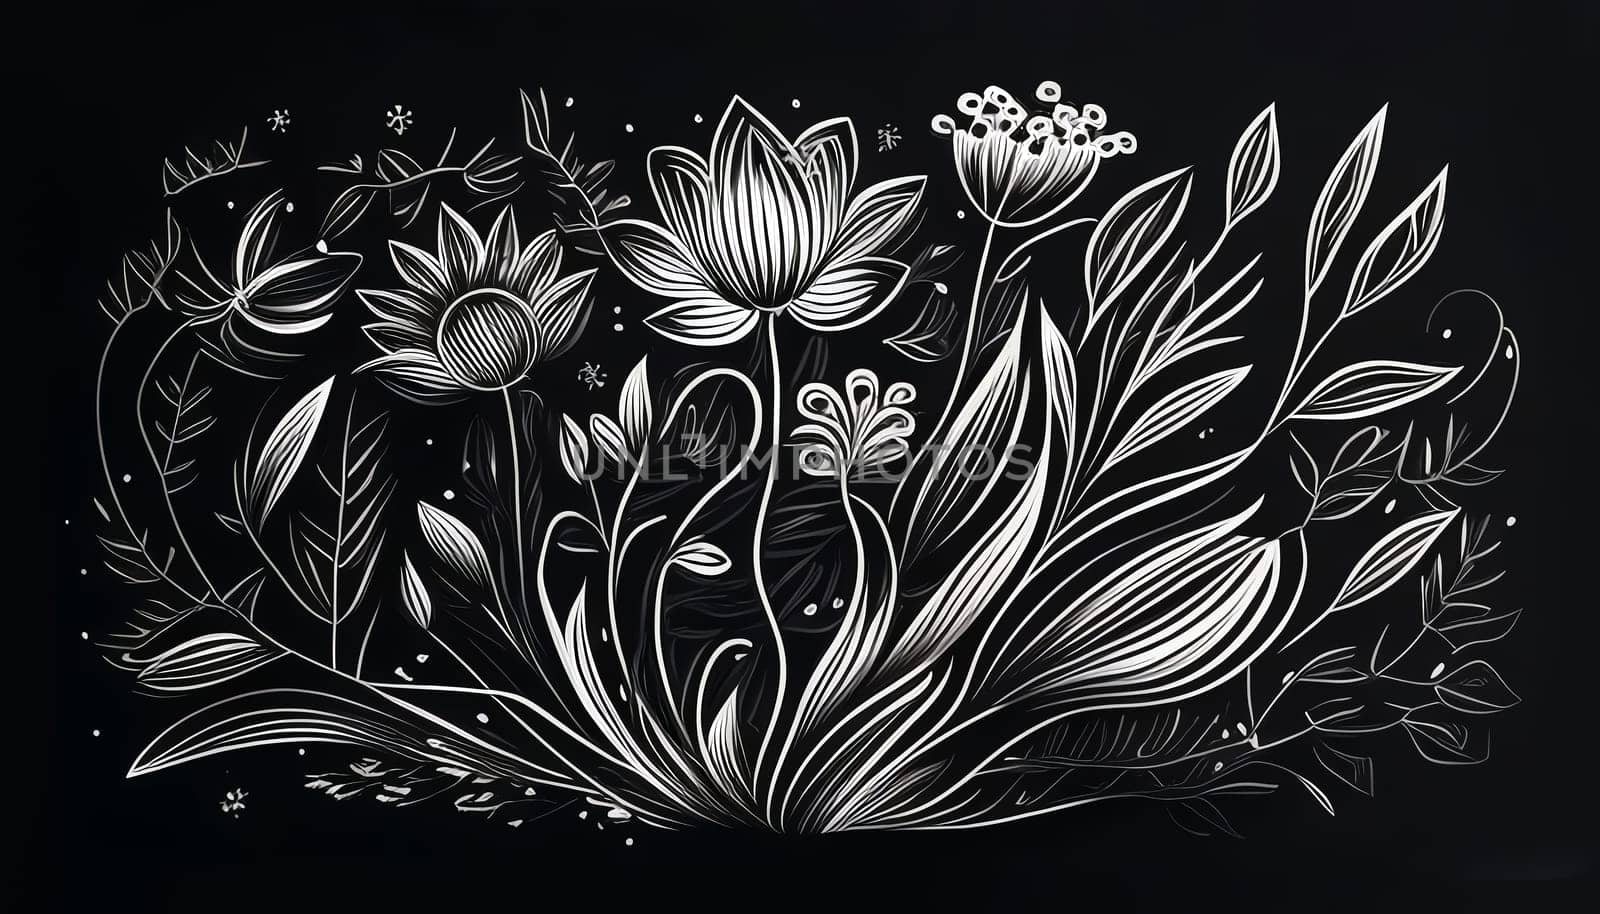 Black and white floral pattern with leaves, flower bouquets. White flowers and black background. by AndreyKENO